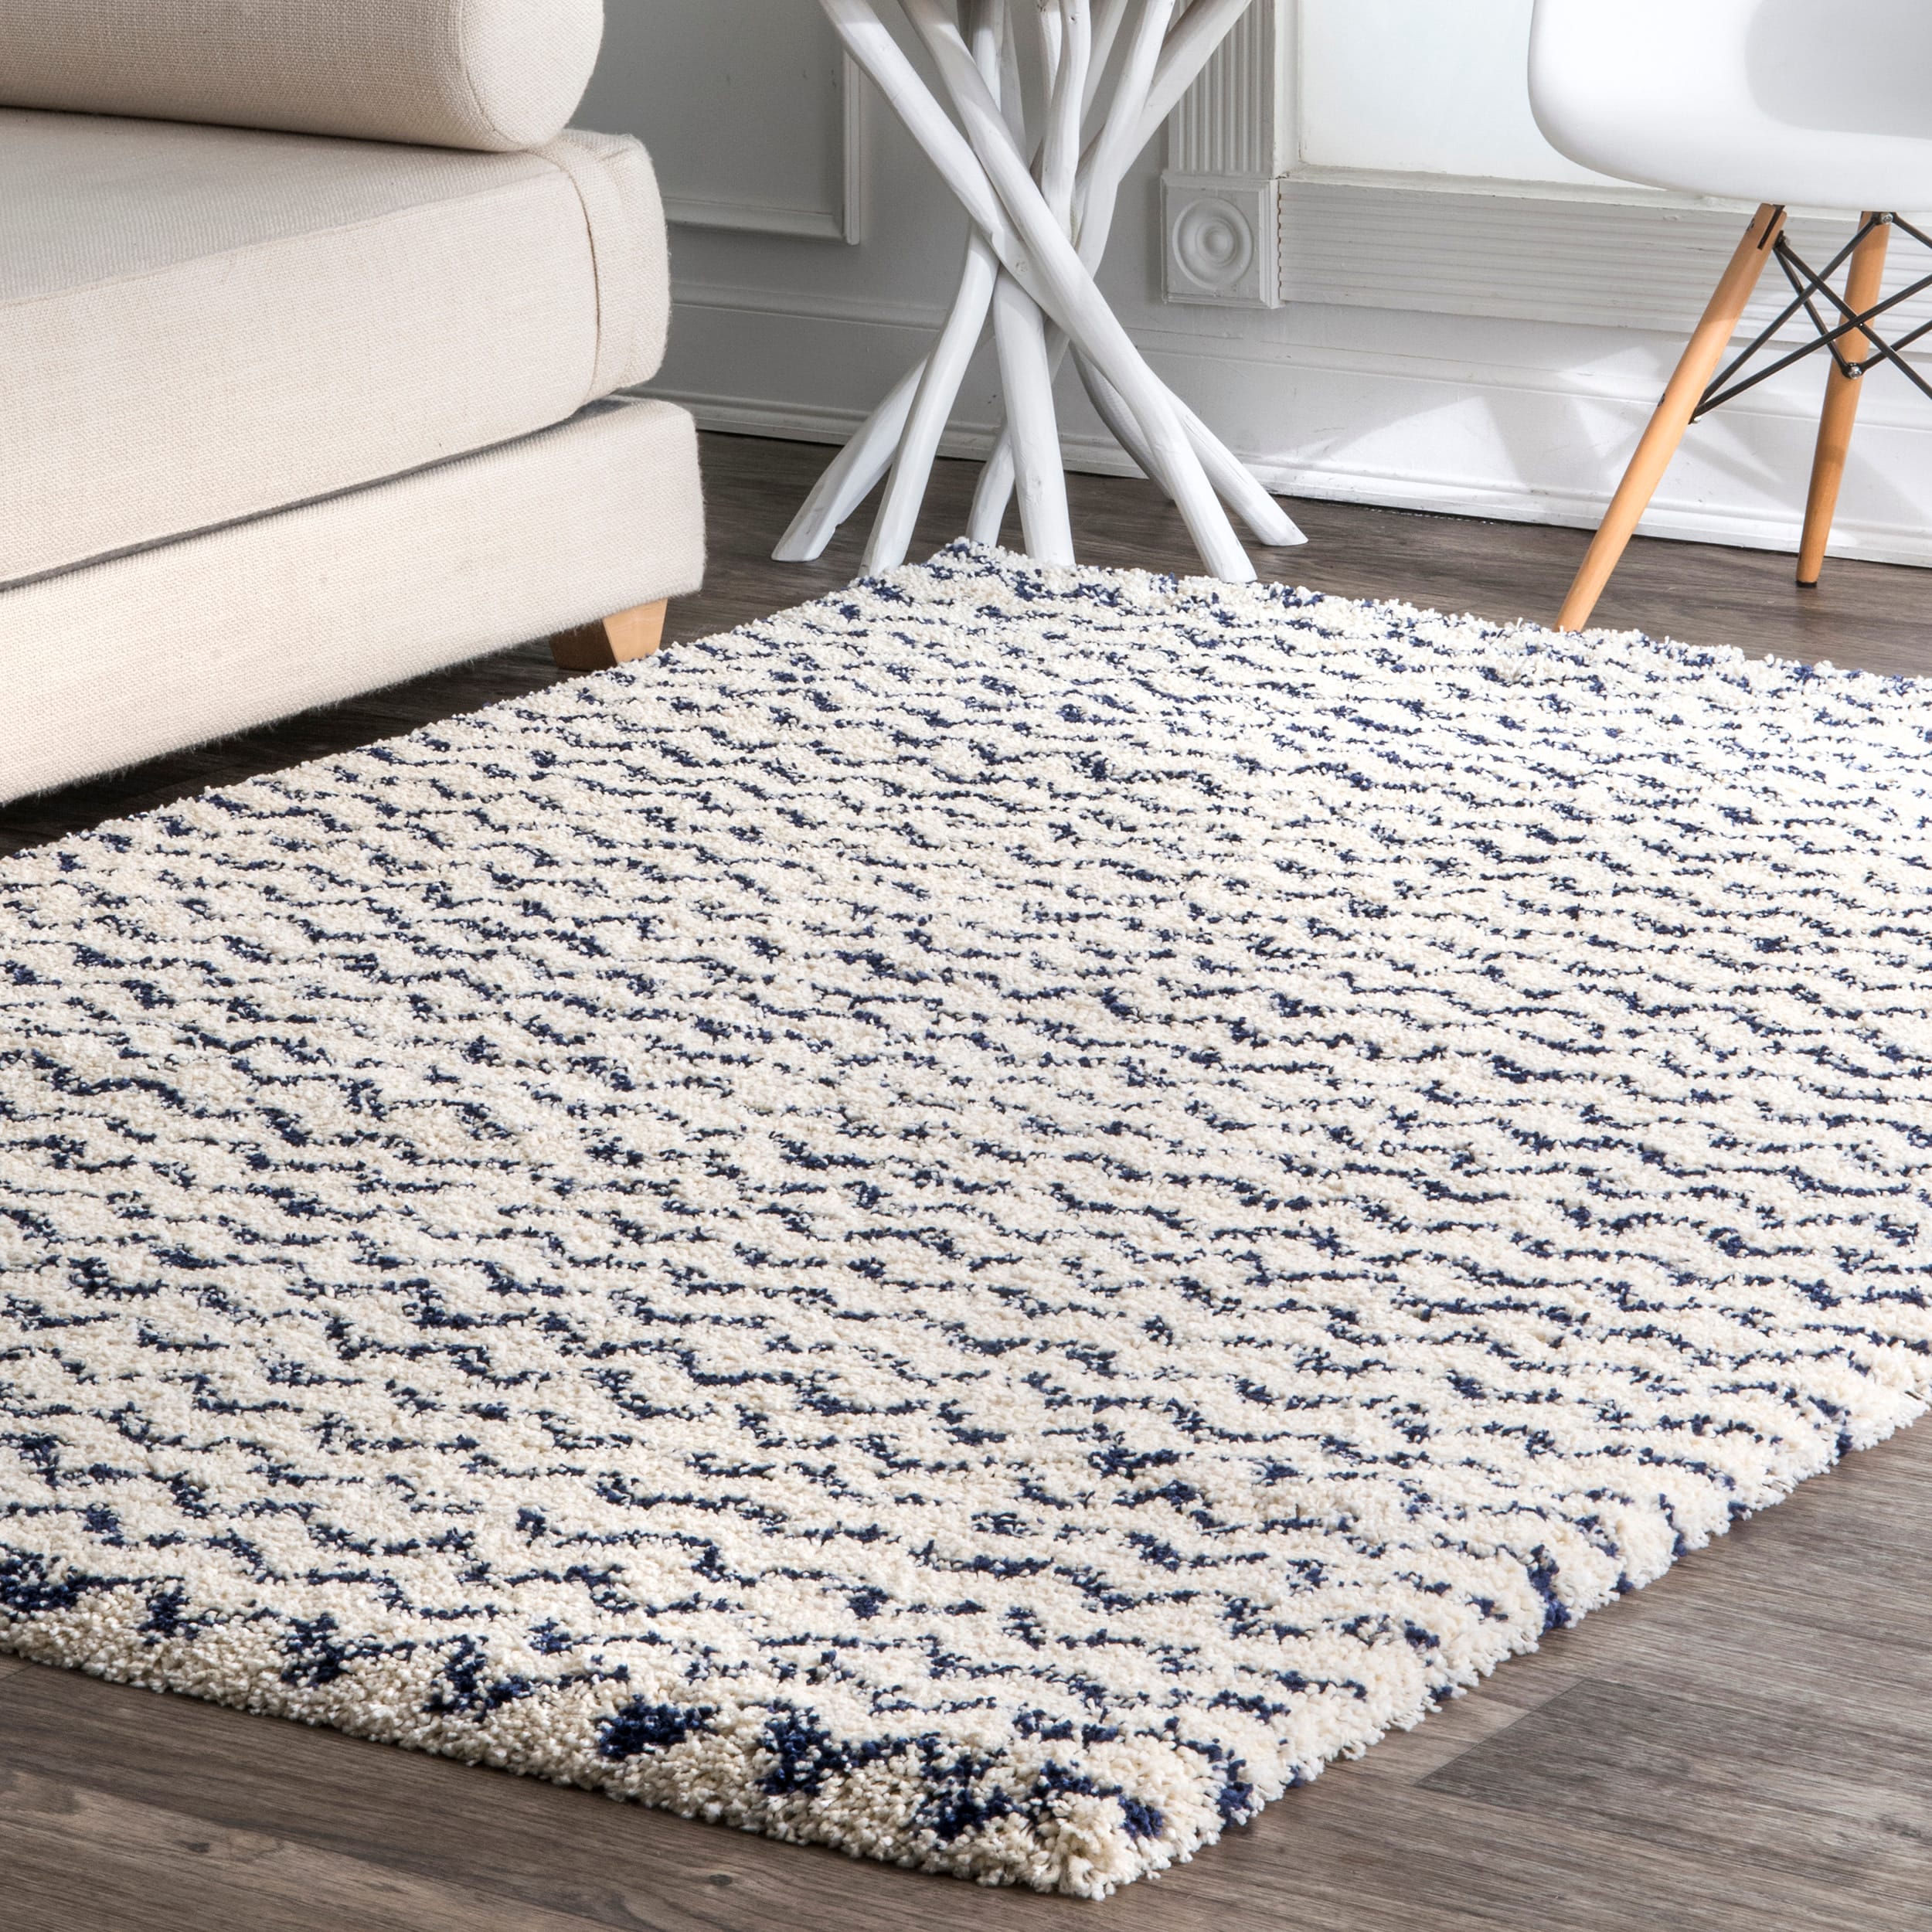 Image of Long shag rug with chevron pattern